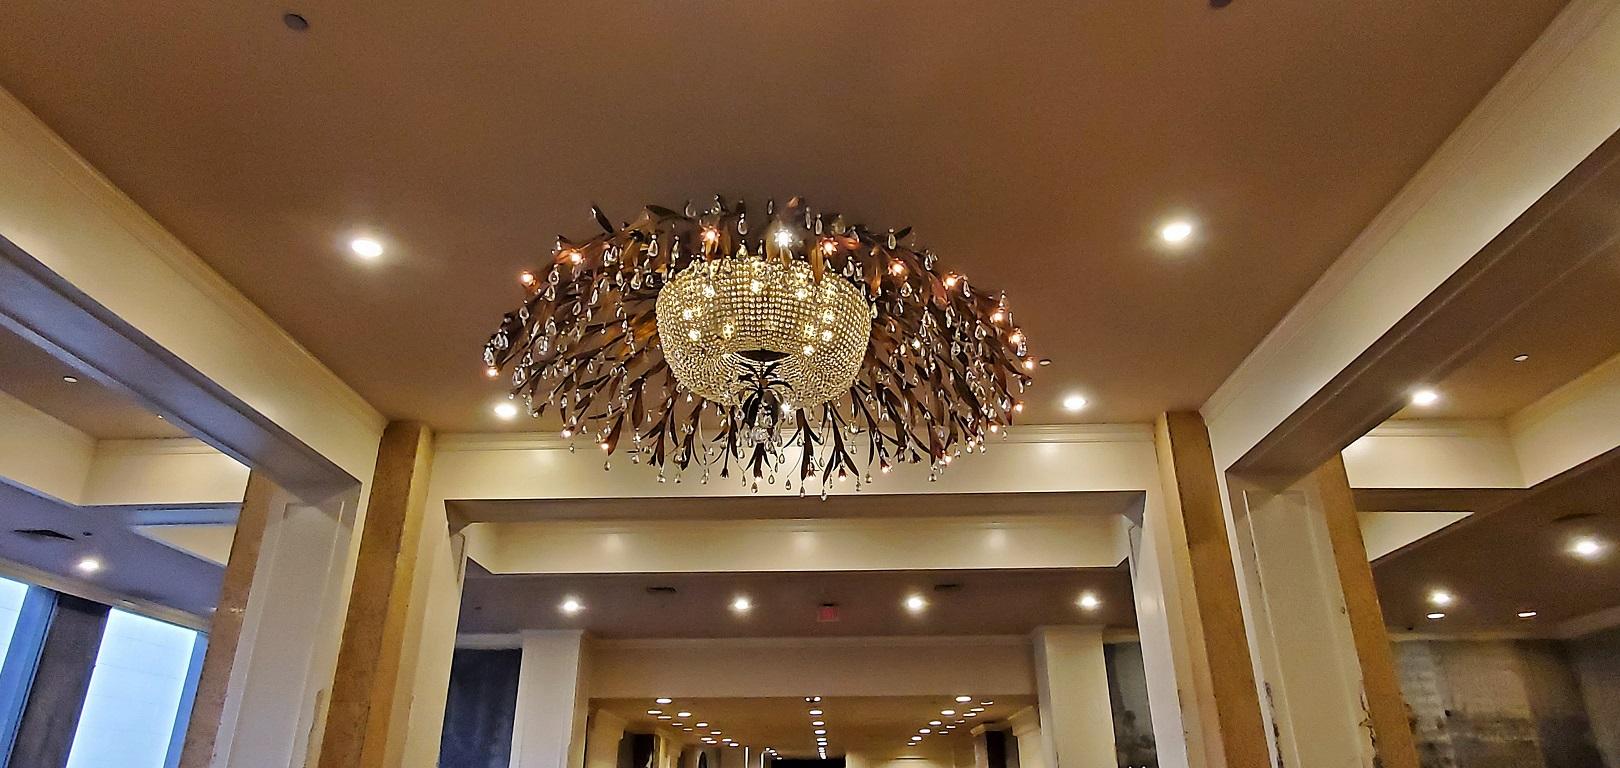 We have the distinct pleasure to present to you a monumental bronze and floral crystal chandelier with amazing provenance.

From The Foyer Of The Regency Ballroom Of The Fairmont Hotel In Dallas, Tx – One Of The Most Iconic Hotels In Dallas
This